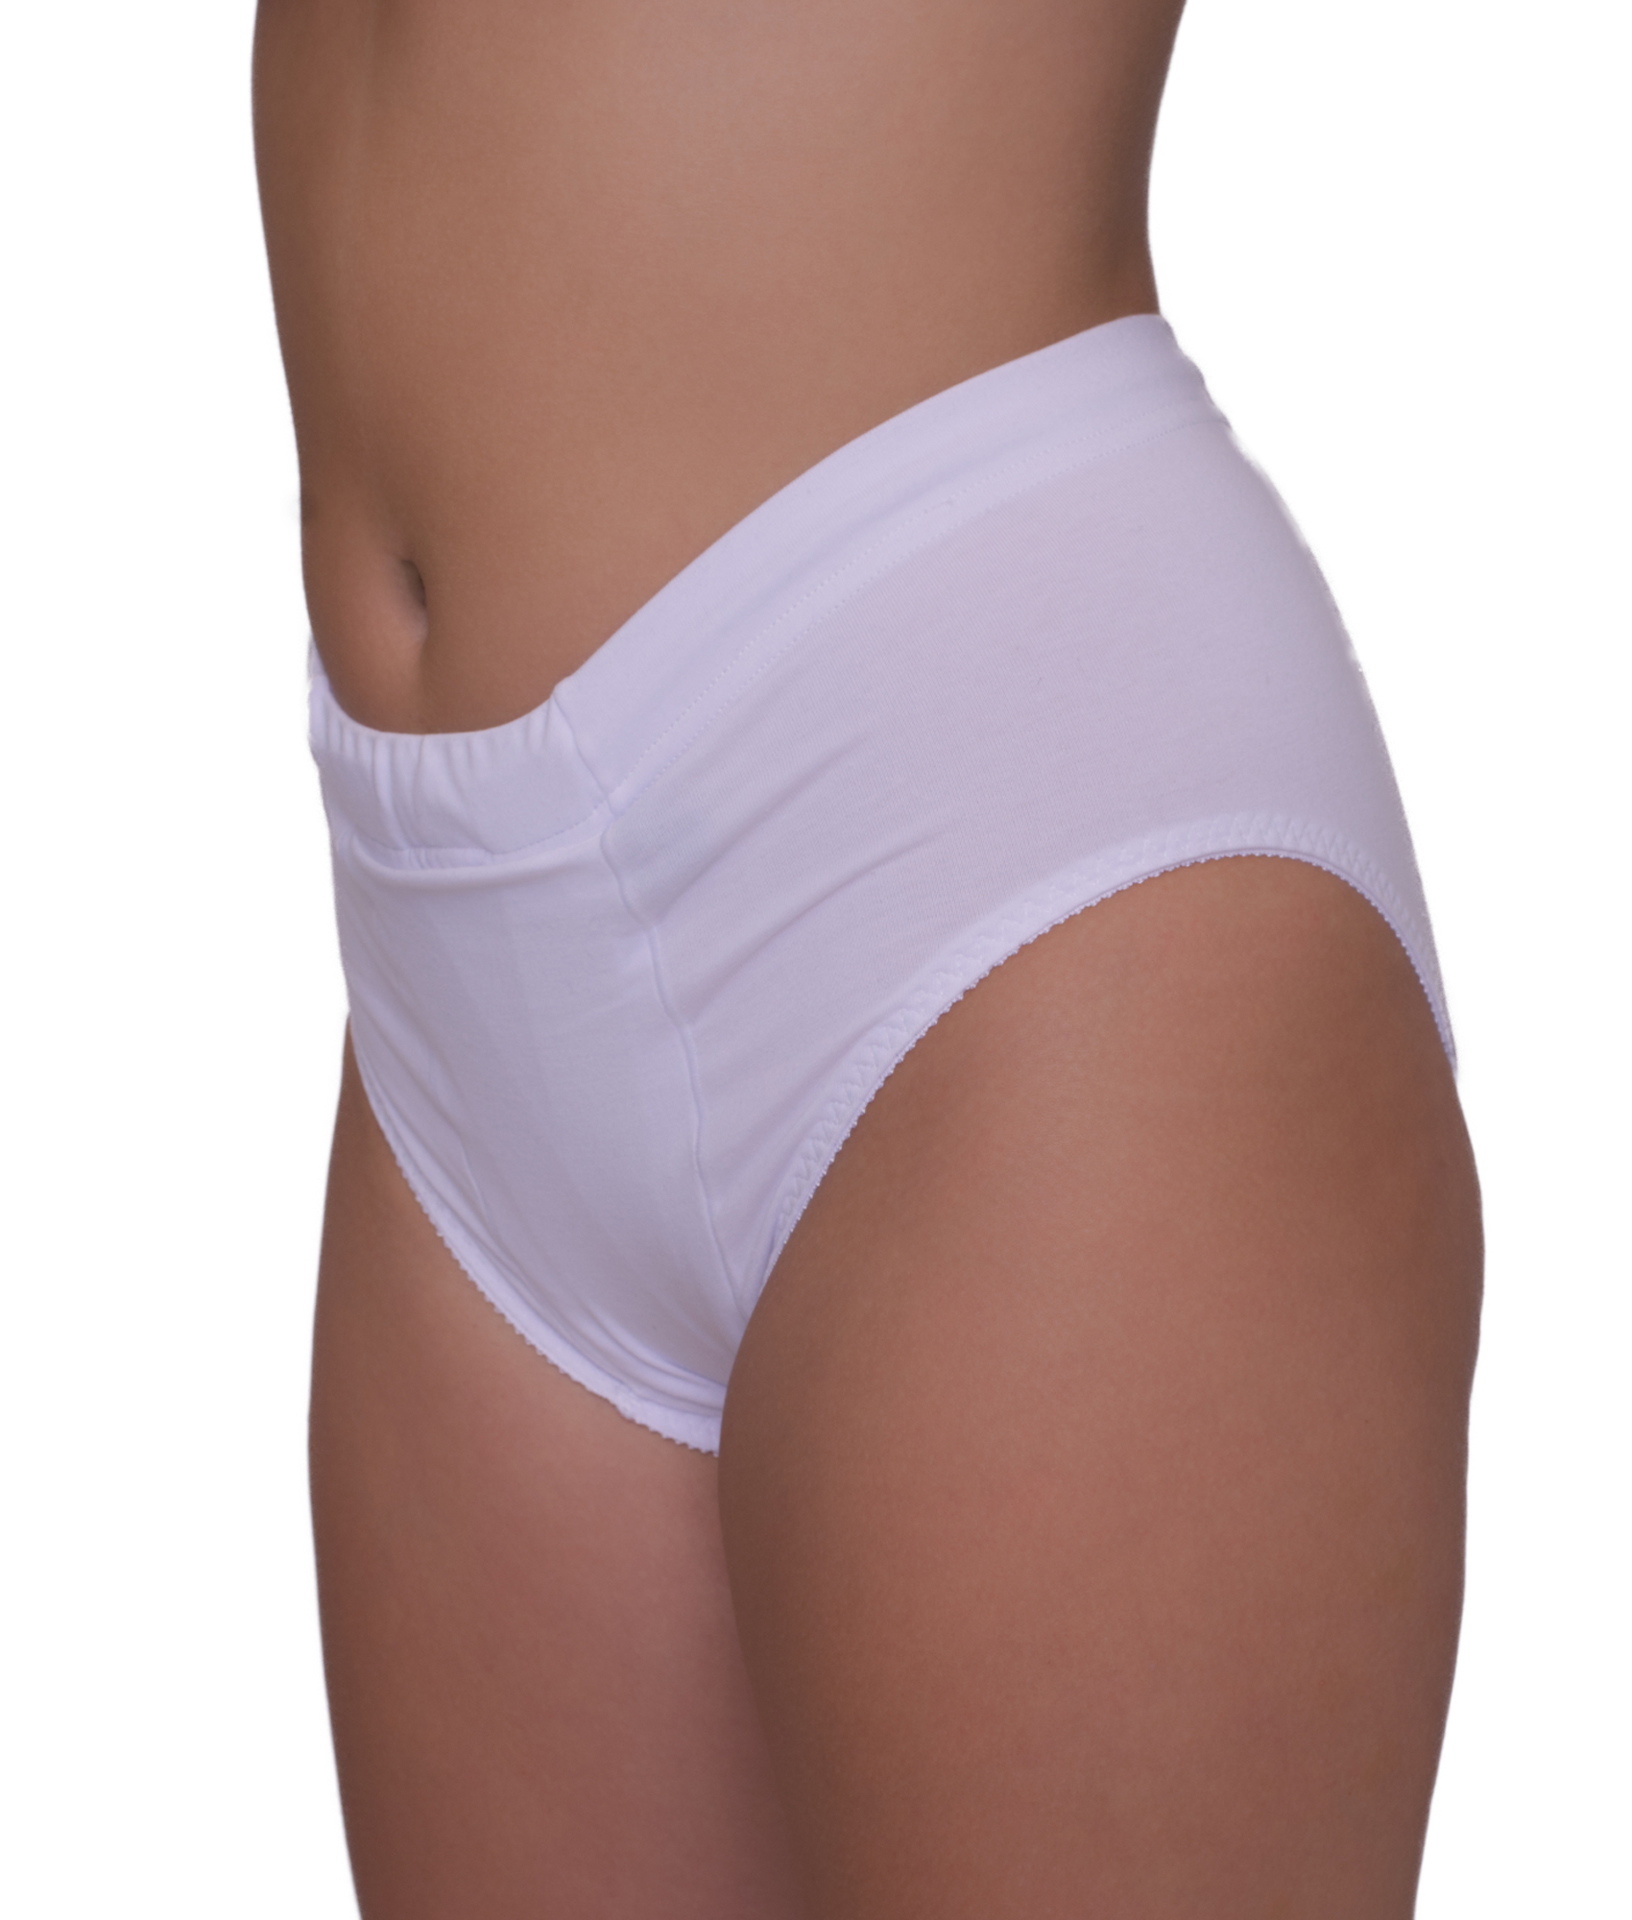 Underworks Vulvar Varicosity and Prolapse Support Brief with Groin  Compression Bands